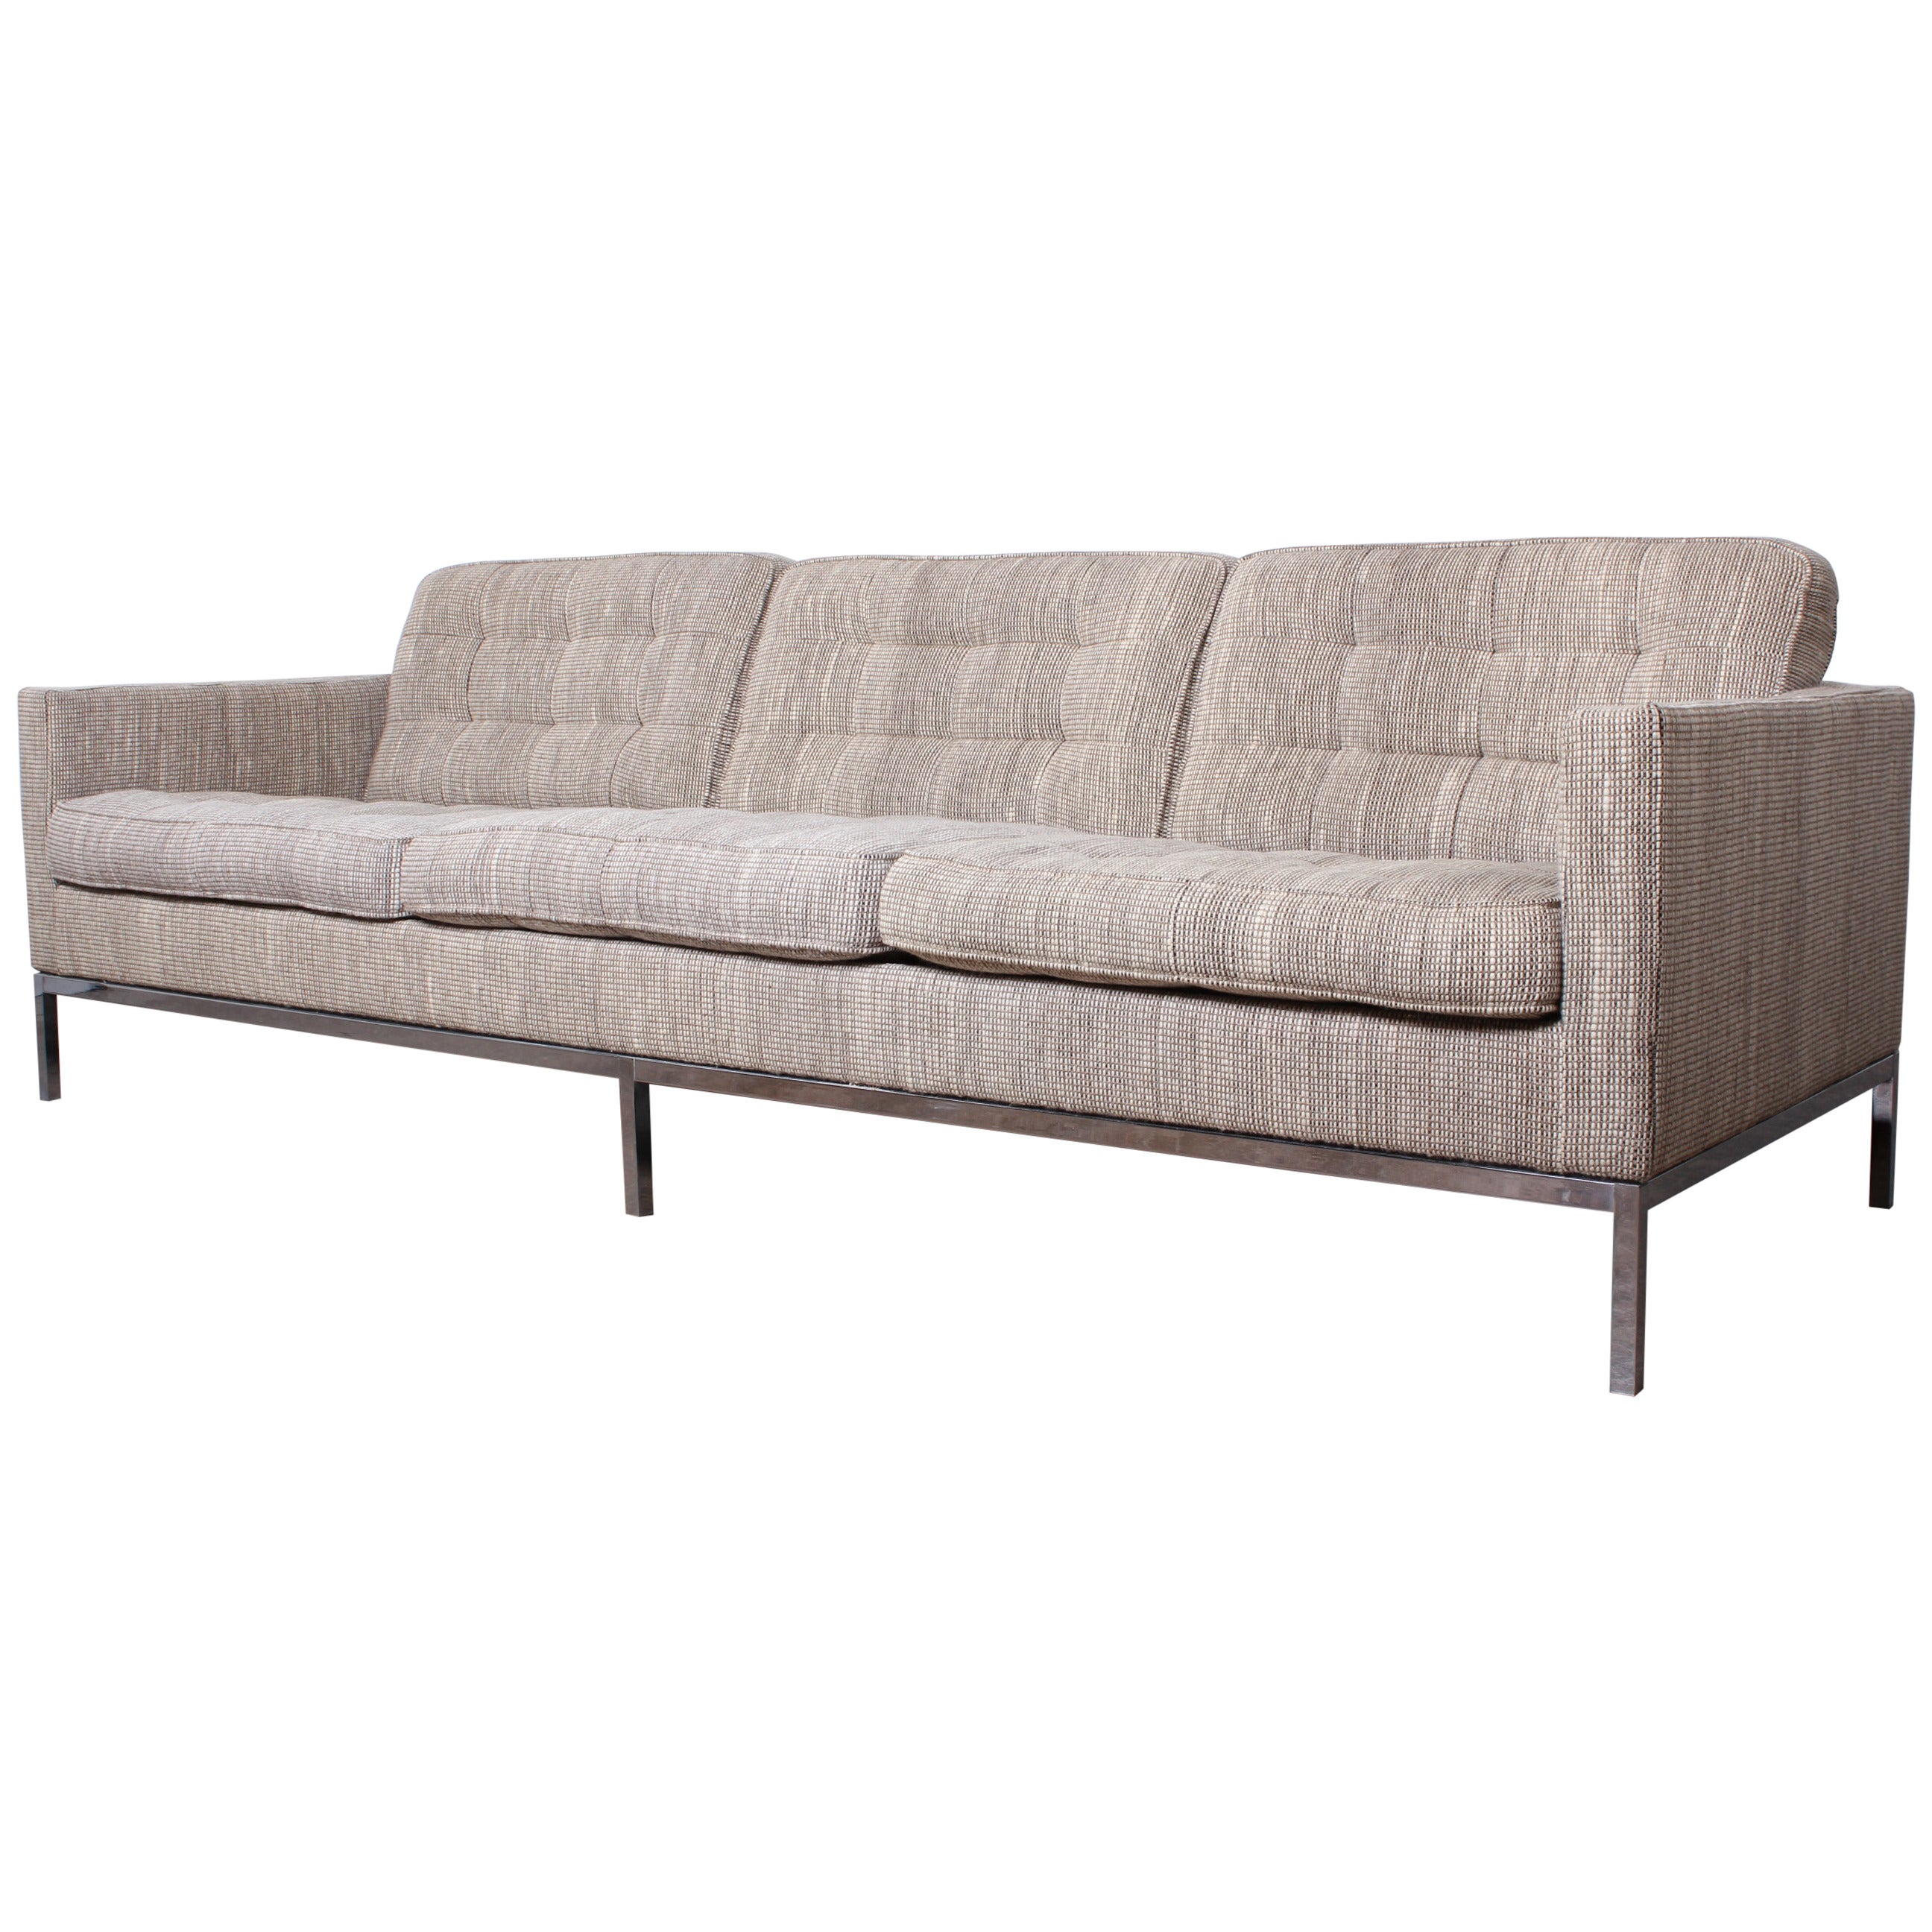 Sofa Designed by Florence Knoll in "Cato" Wool Upholstery